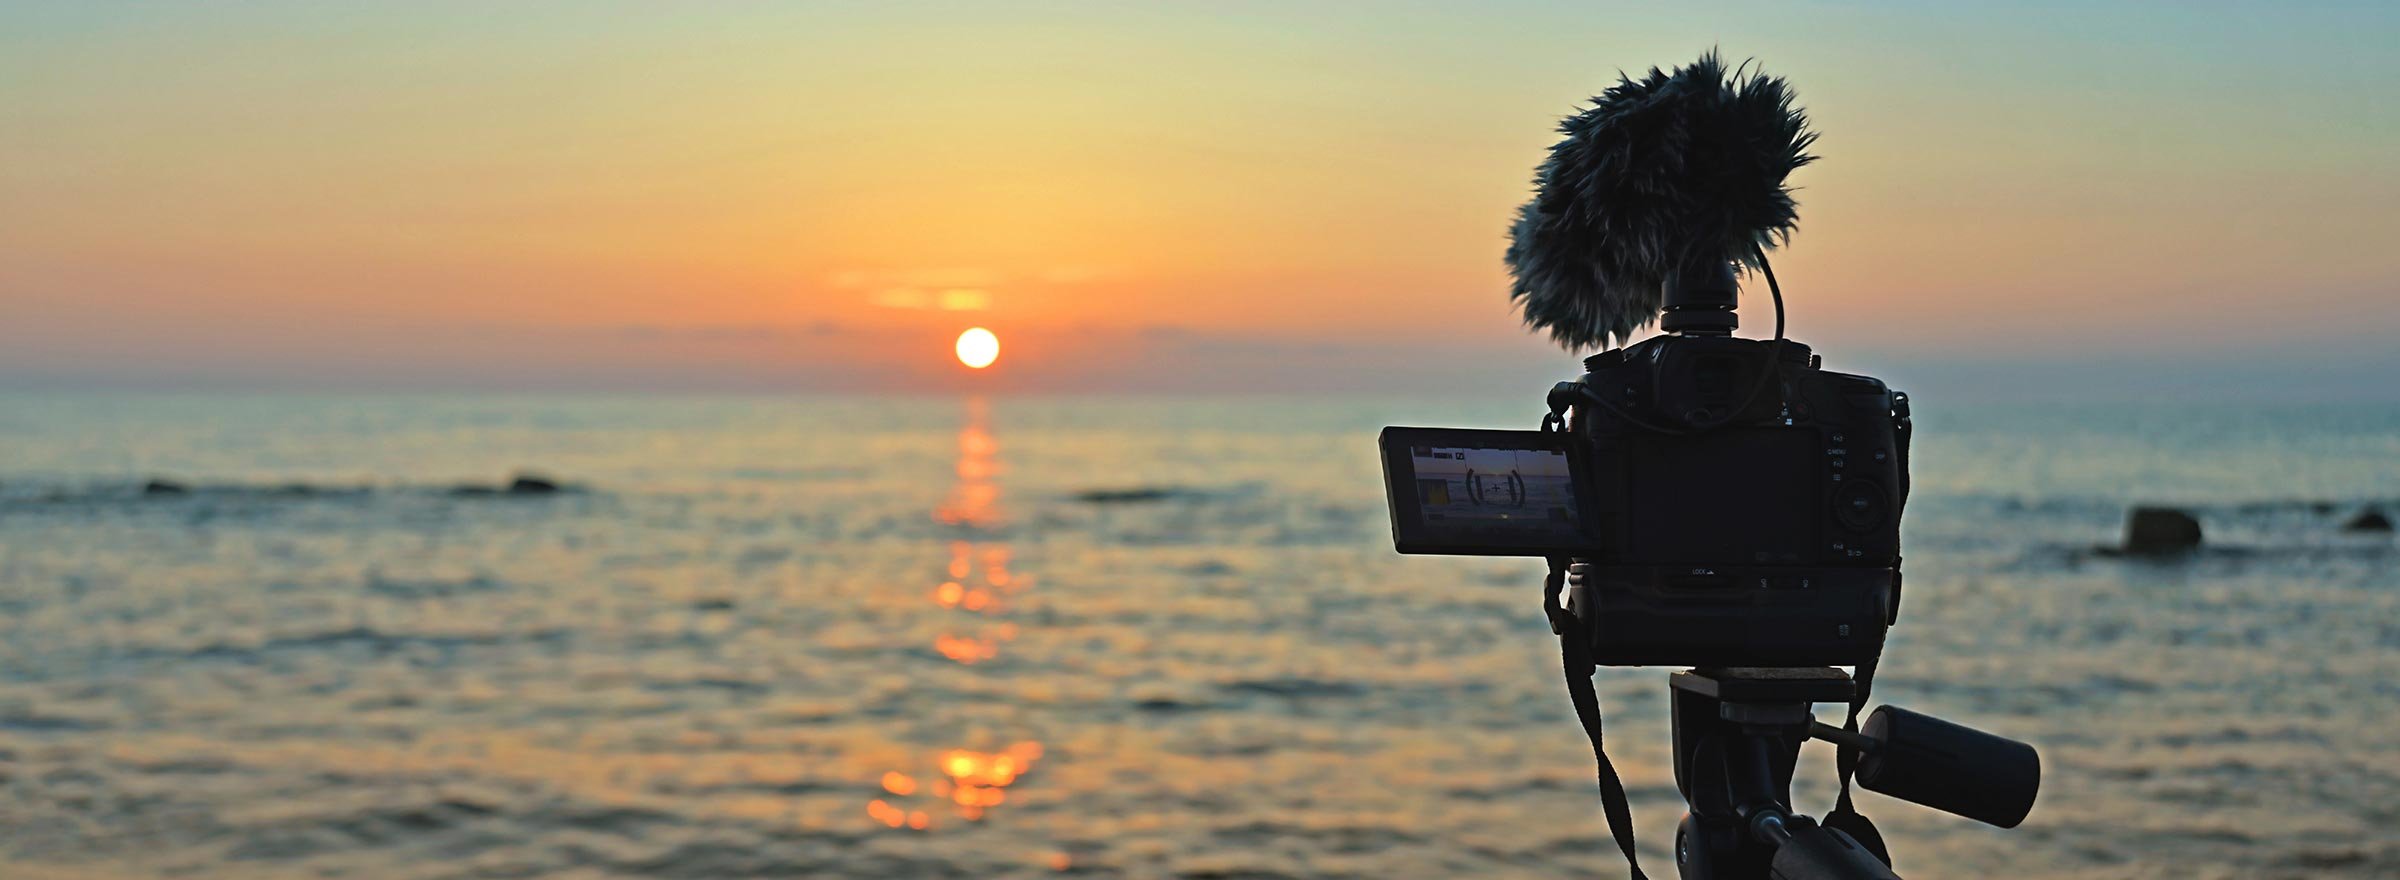 camera on tripod and supporting microphone points over the water to a setting or rising sun